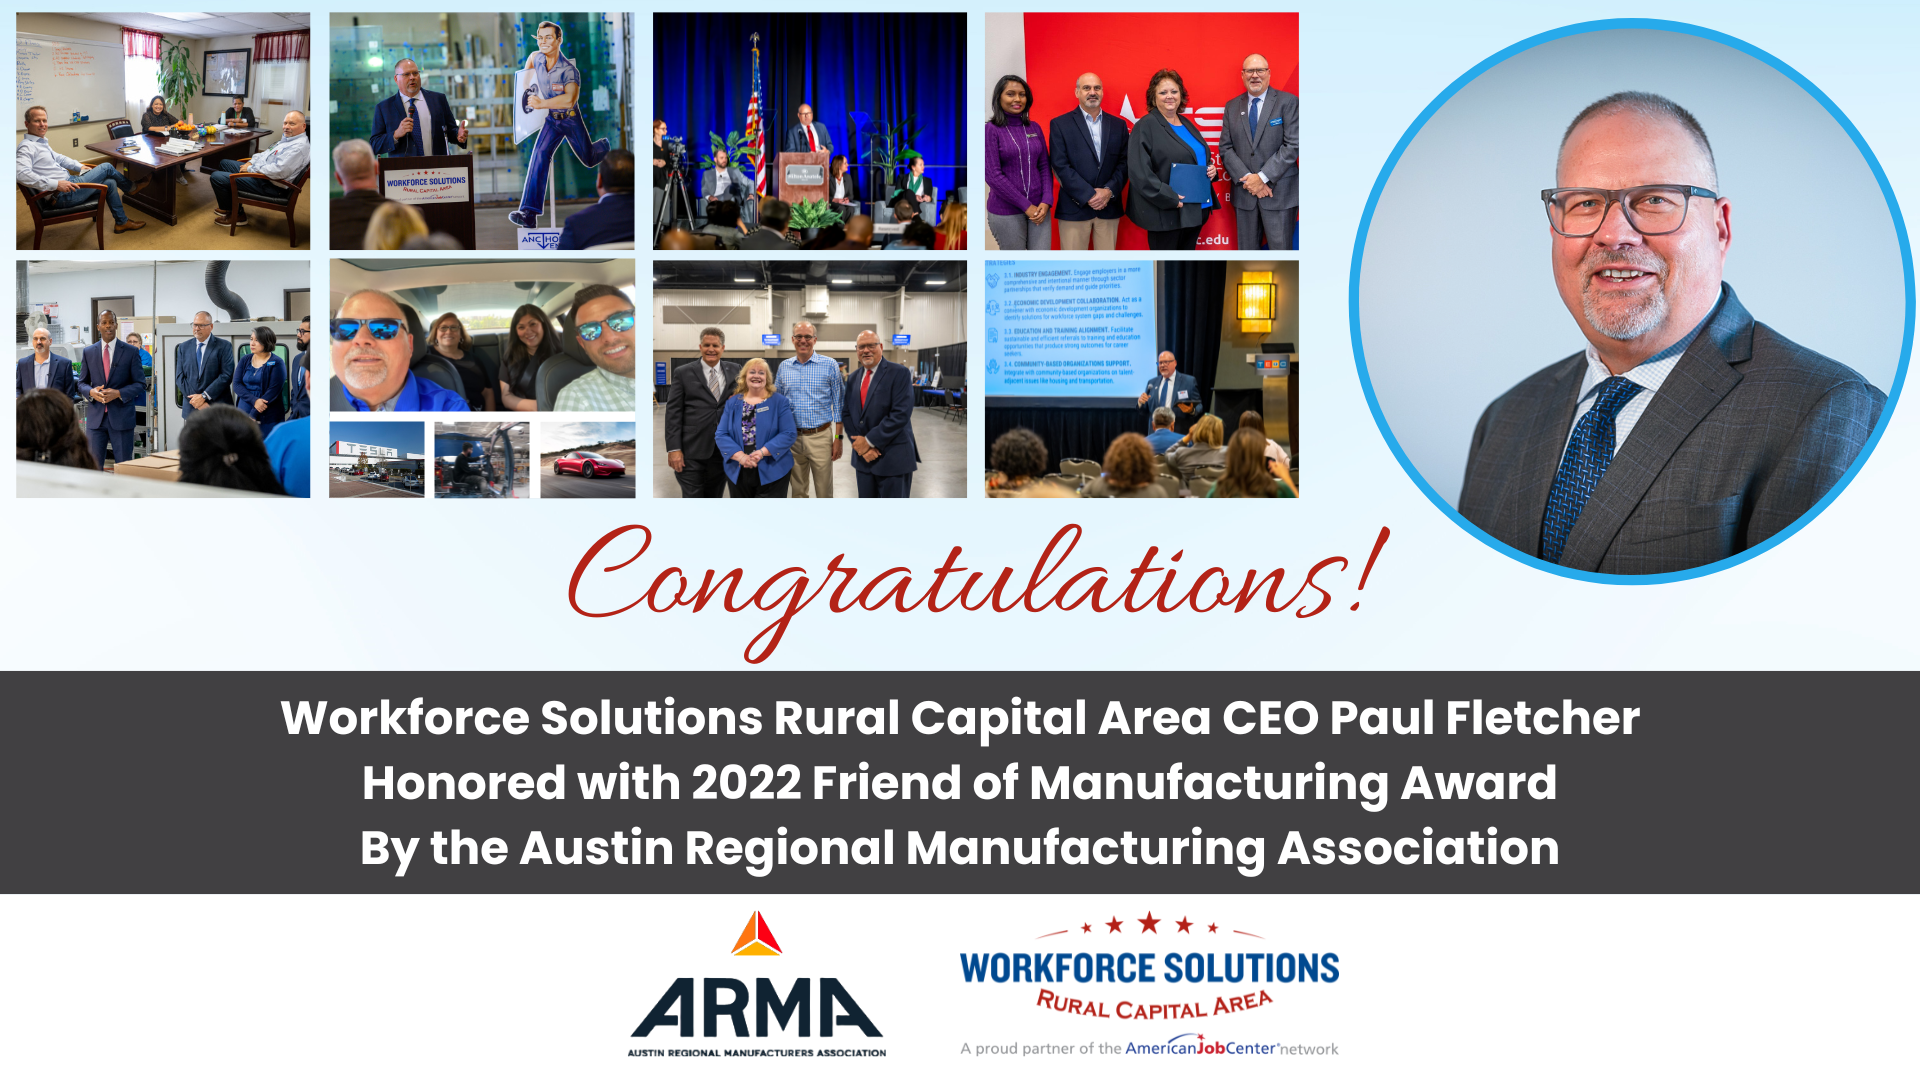 WSRCA CEO Paul Fletcher Honored with 2022 Friend of Manufacturing Award by ARMA